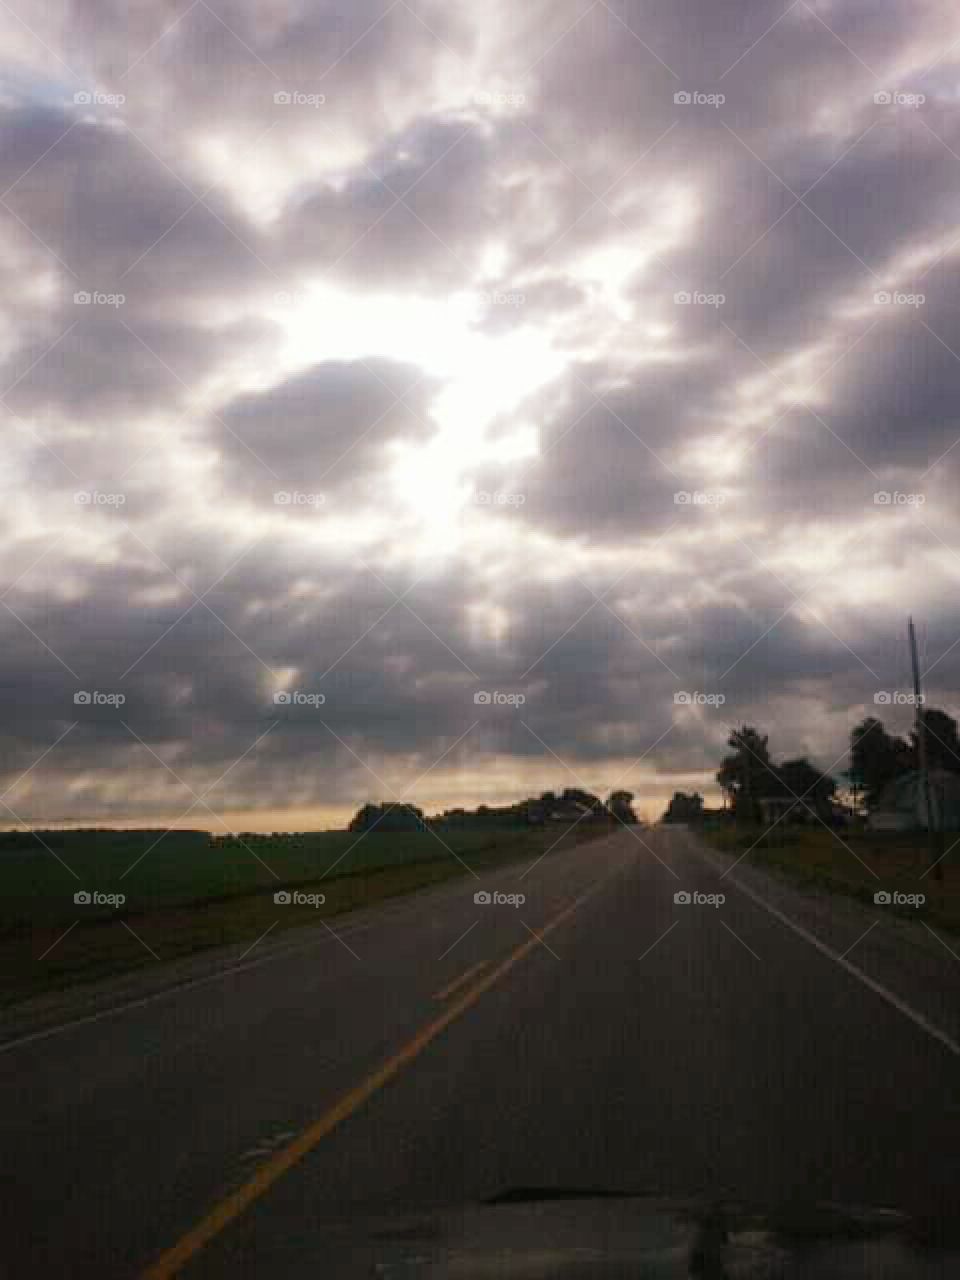 The Road To Heaven